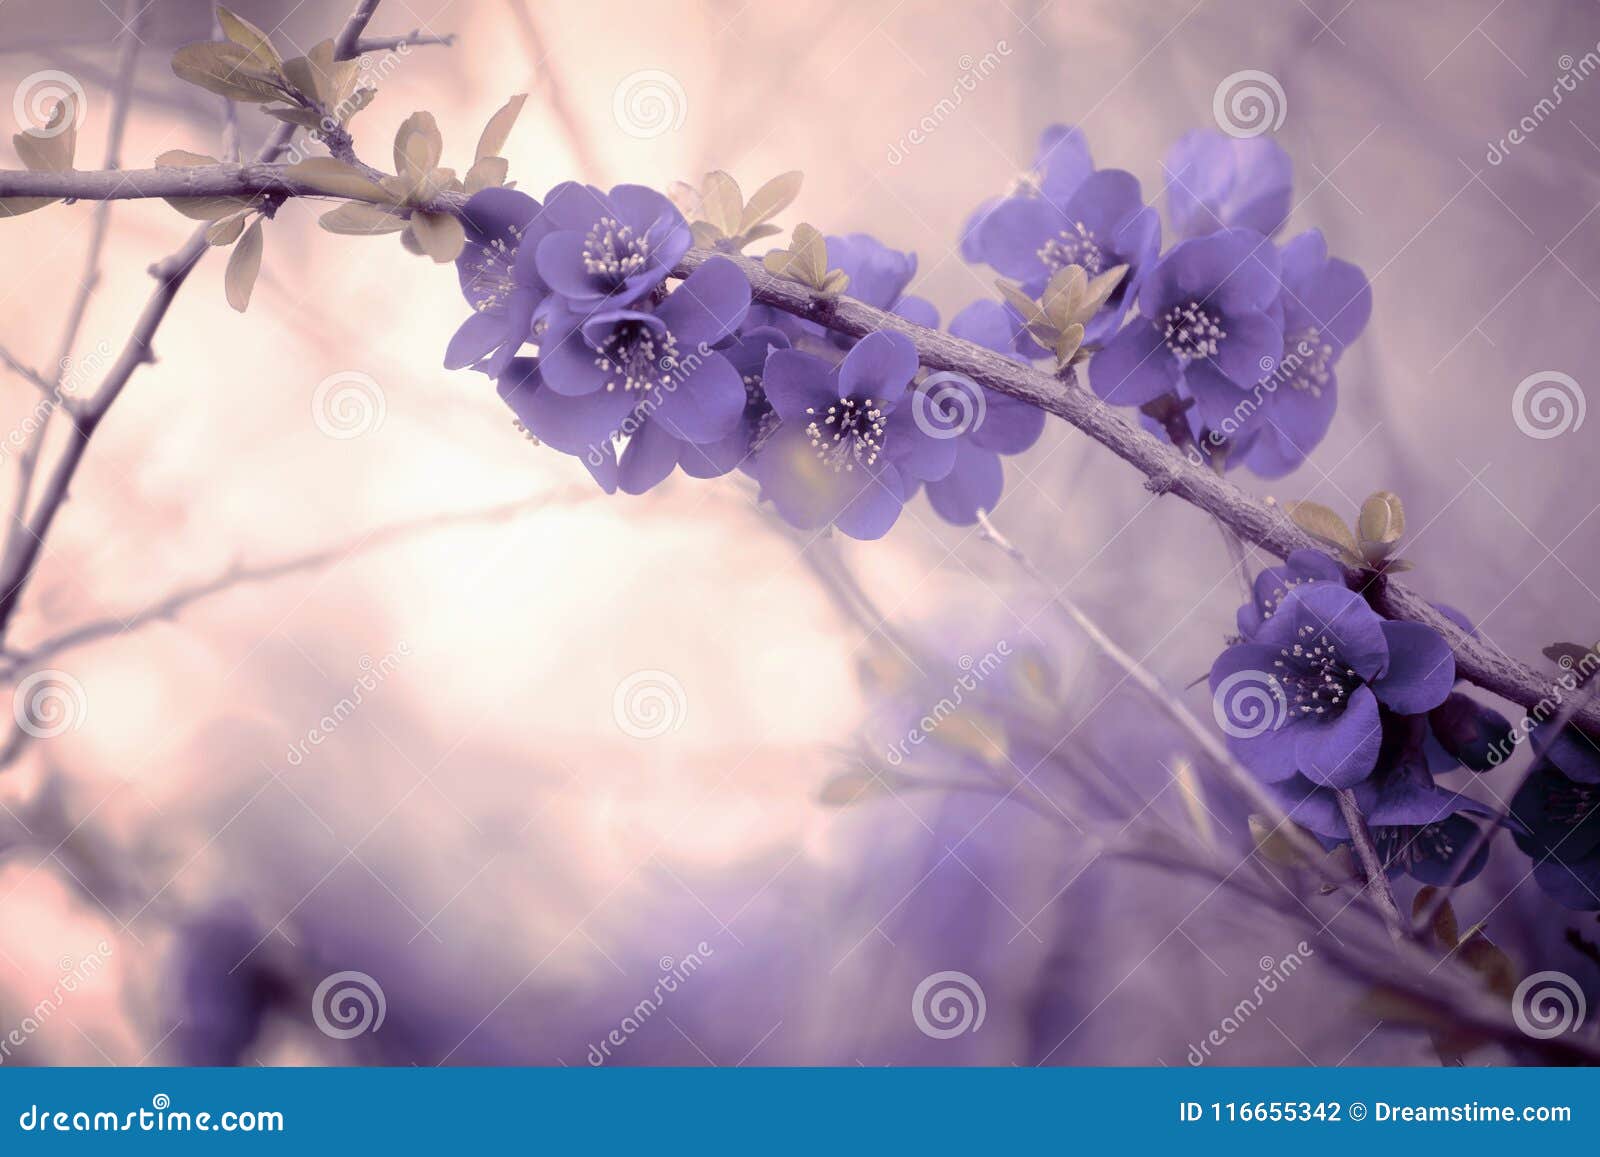 branch with purple blossoms in pastel ambience